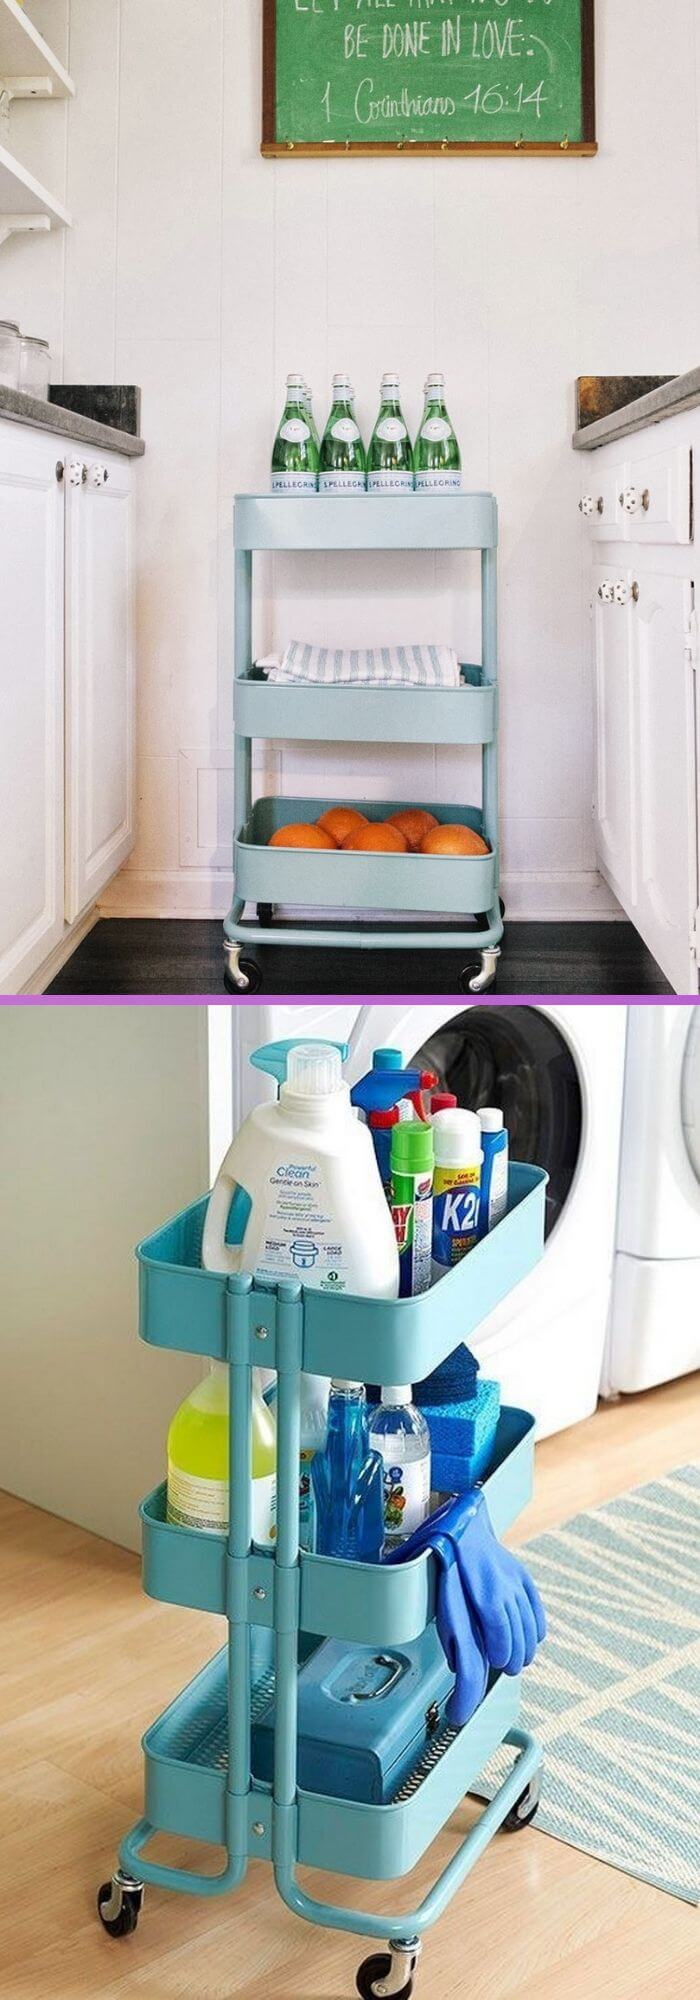 Shelf with wheels to store products in the kitchen A cart that moves where you can put hygienic products